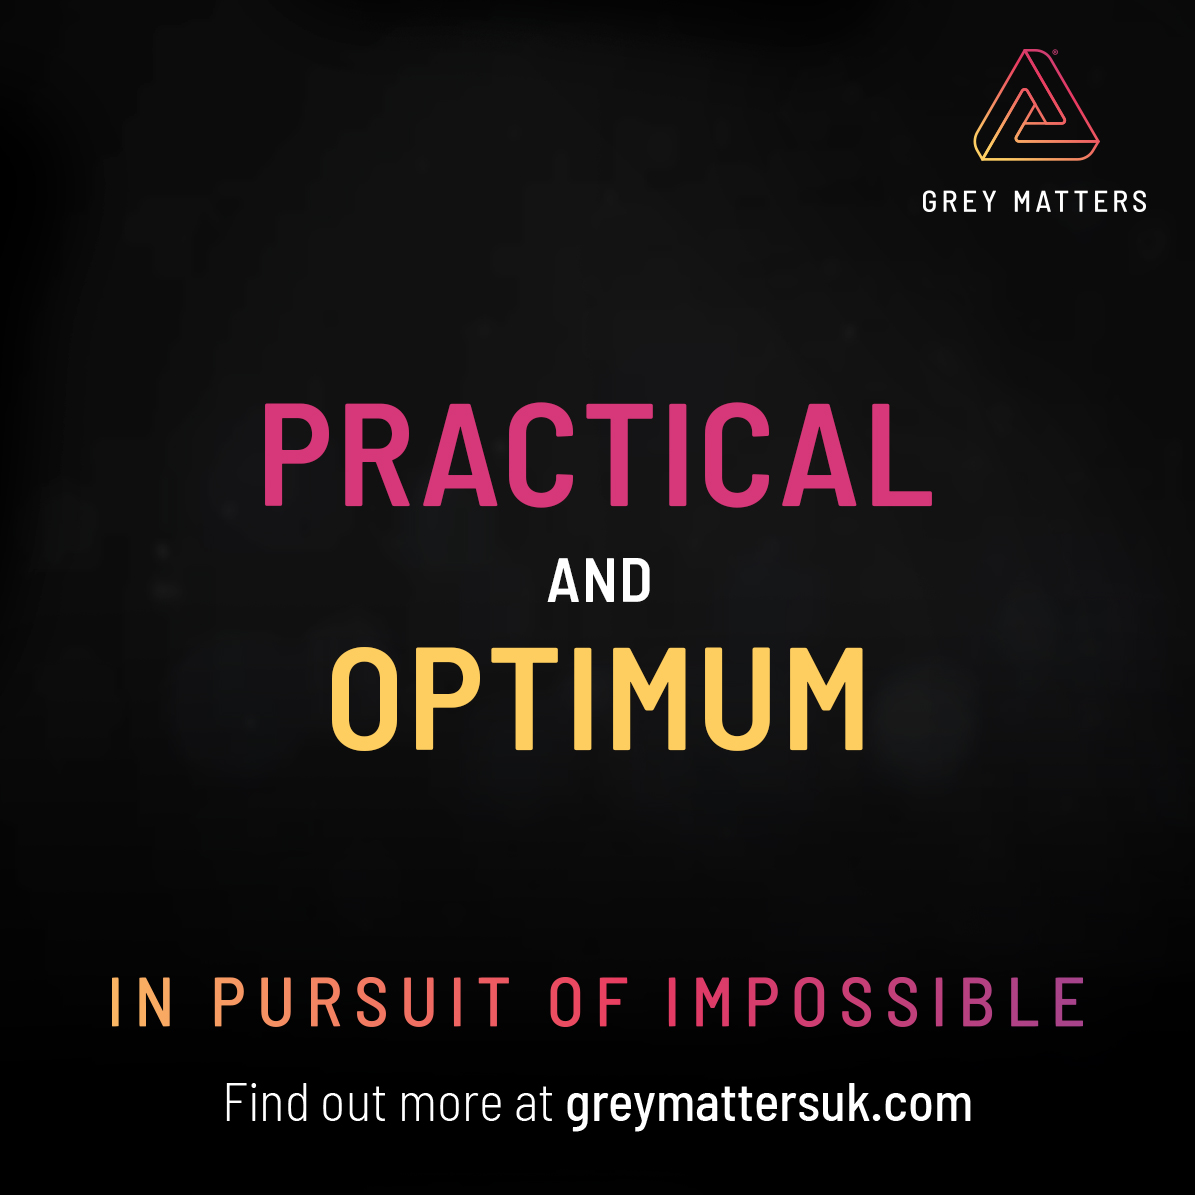 Grey Matters develop practical but optimum solutions to address each individual challenge that you face. By addressing each challenge faced we can help best enhance your performance https://t.co/ww2kkWm5fS

#coaching #sportpsychology #sport #success #performance #greymatters https://t.co/QxYiVPi3mL